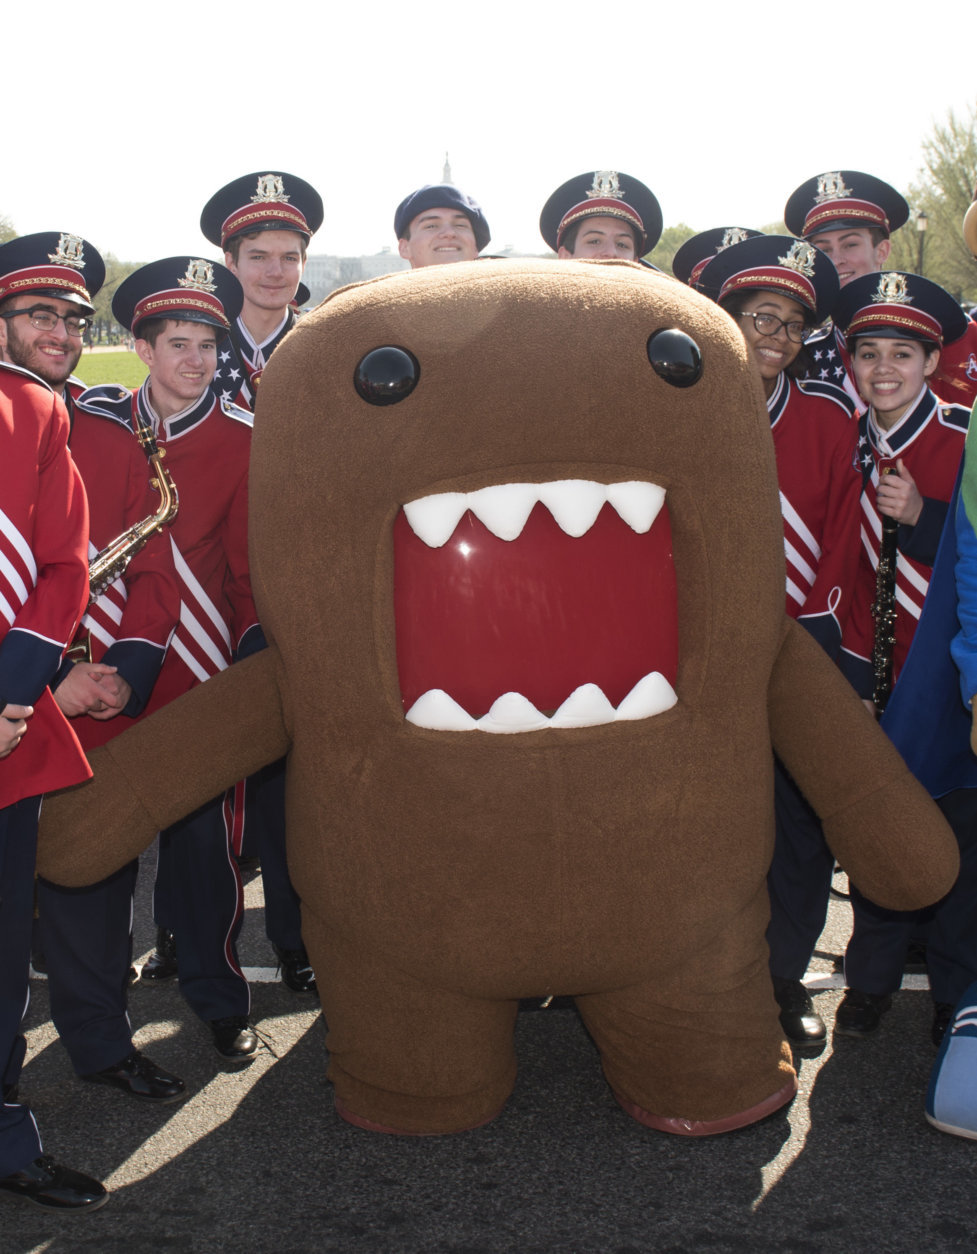 IMAGE DISTRIBUTED NHK WORLD - NHK WORLD-JAPAN's mascot, Domo, poses for a photo with members of the Austintown-Fitch High School marching band, from Austintown, Ohio, at the National Cherry Blossom Festival Parade on Saturday, April 14, 2018 in Washington. (Kevin Wolf/AP Images for NHK World)